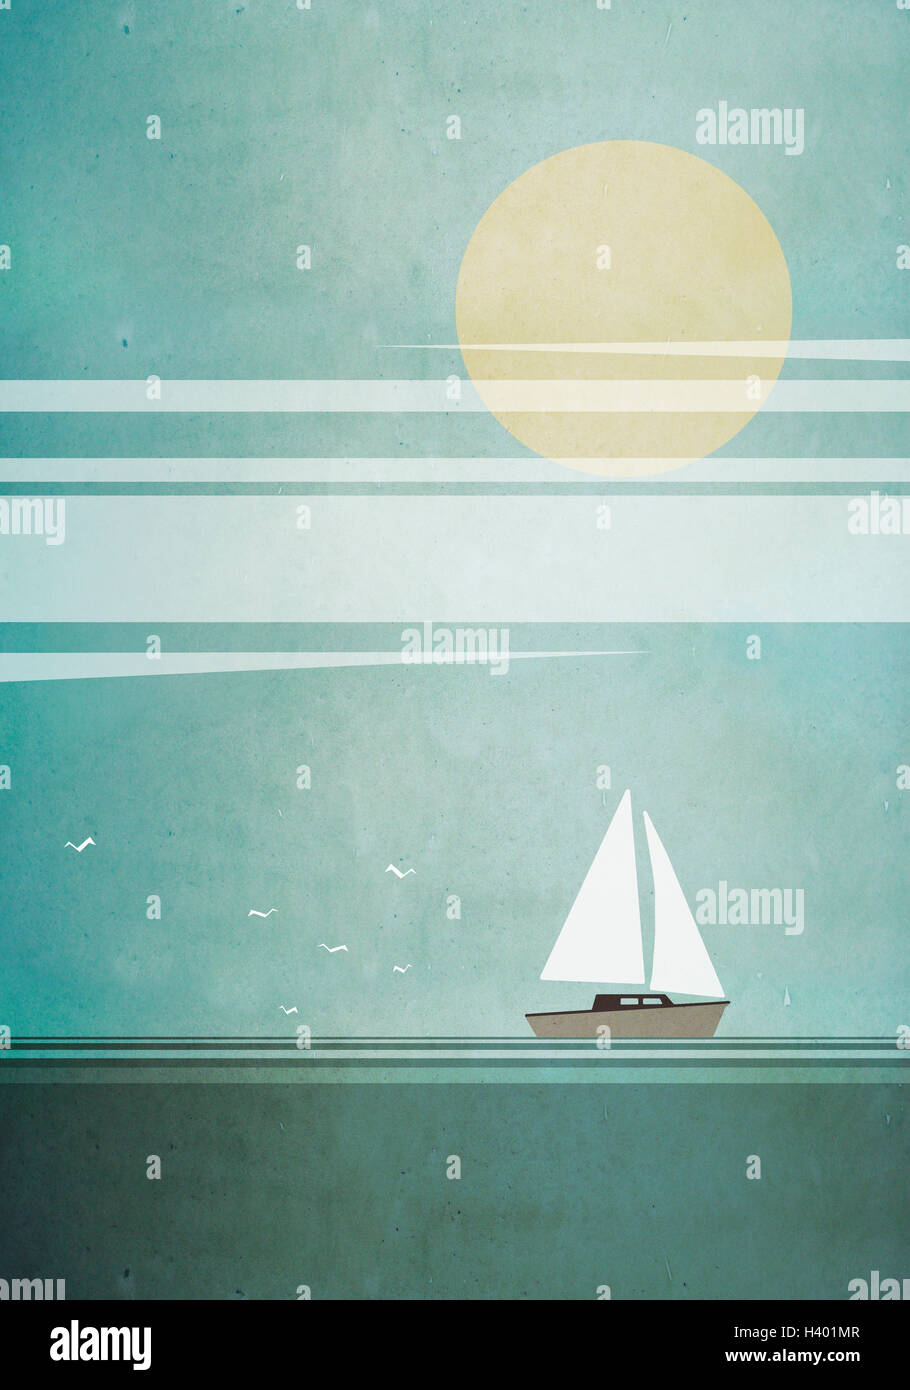 Illustration of boat sailing in sea on sunny day Stock Photo